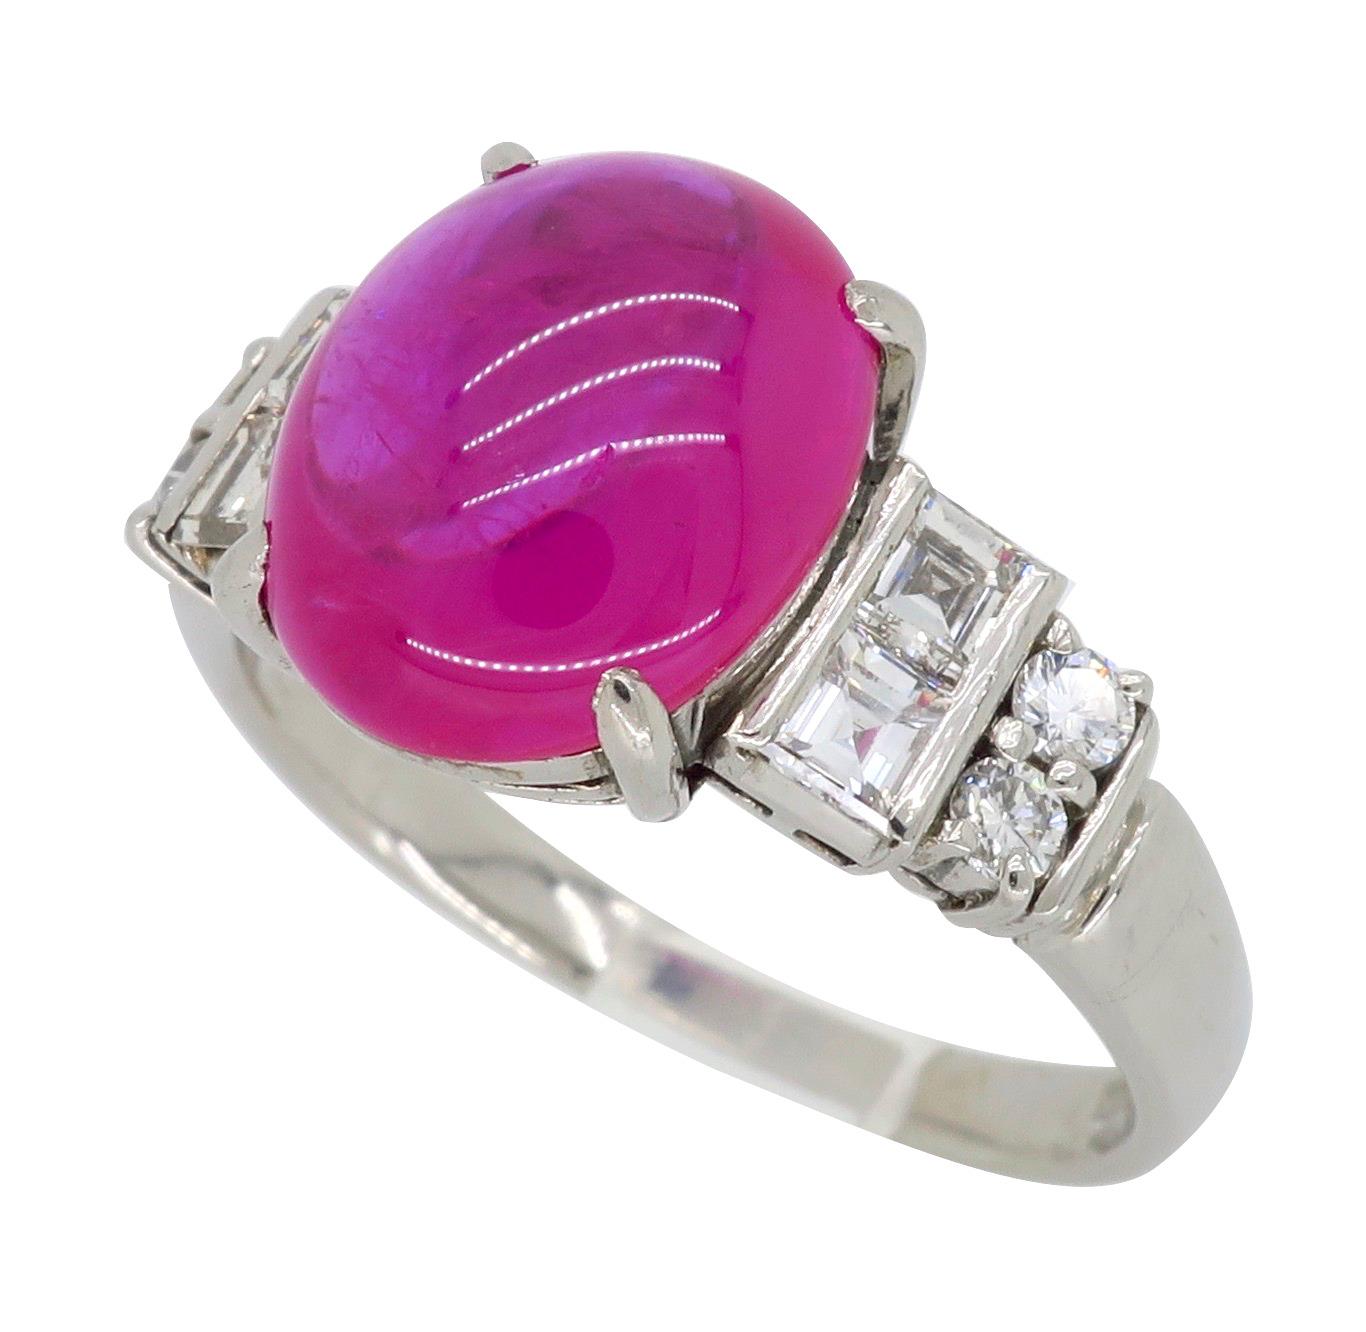 Cabochon Ruby and Diamond Ring in Platinum 7